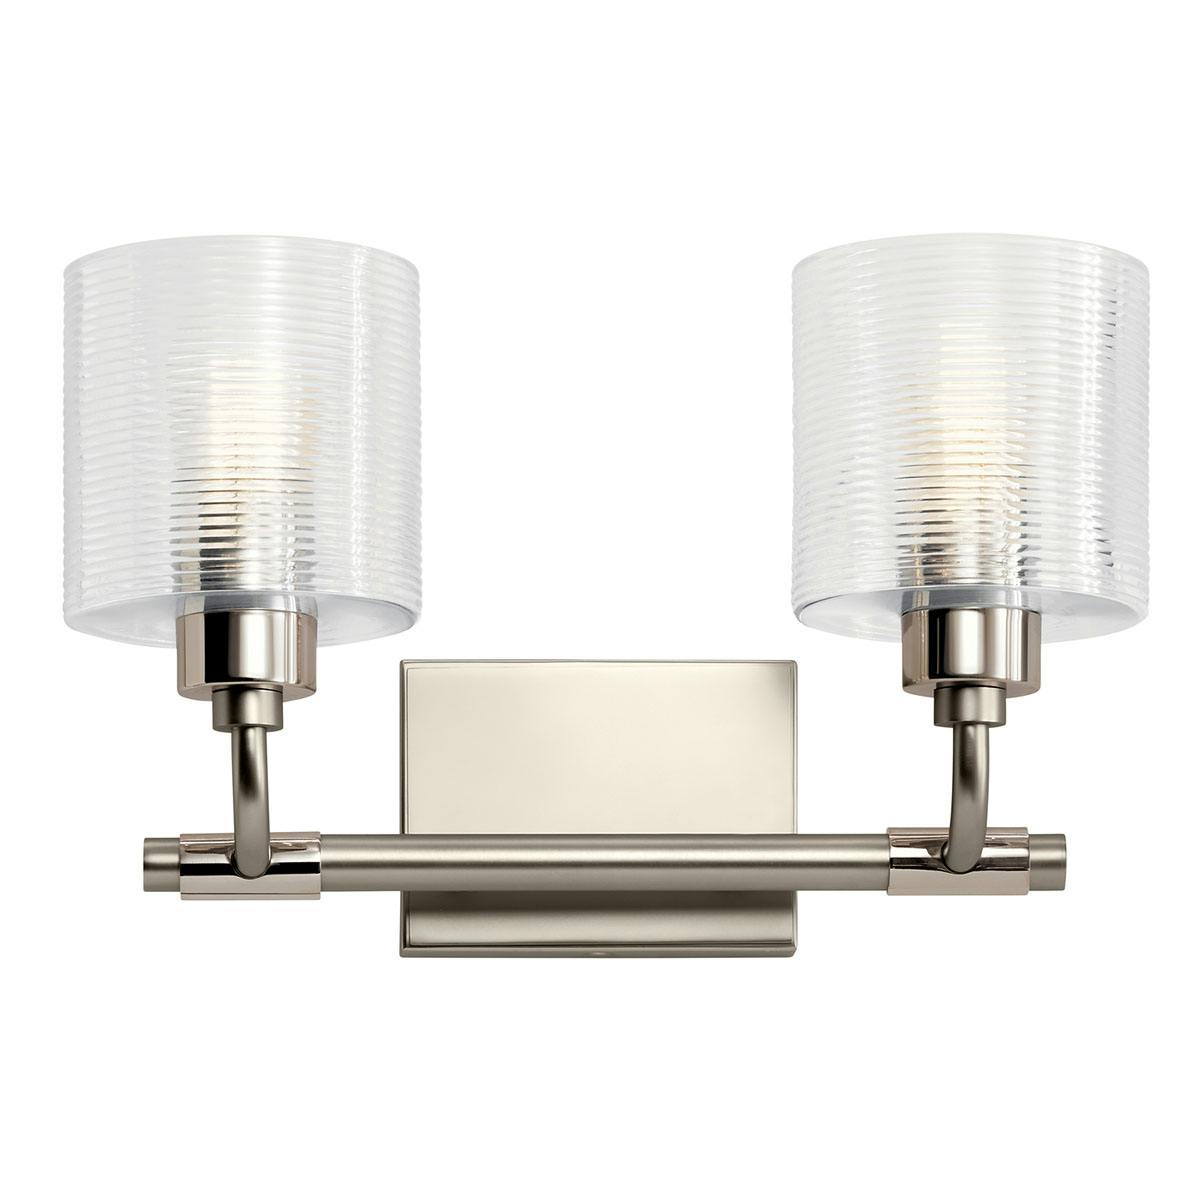 Front view of the Harvan 15" 2 Light Vanity Light Nickel on a white background